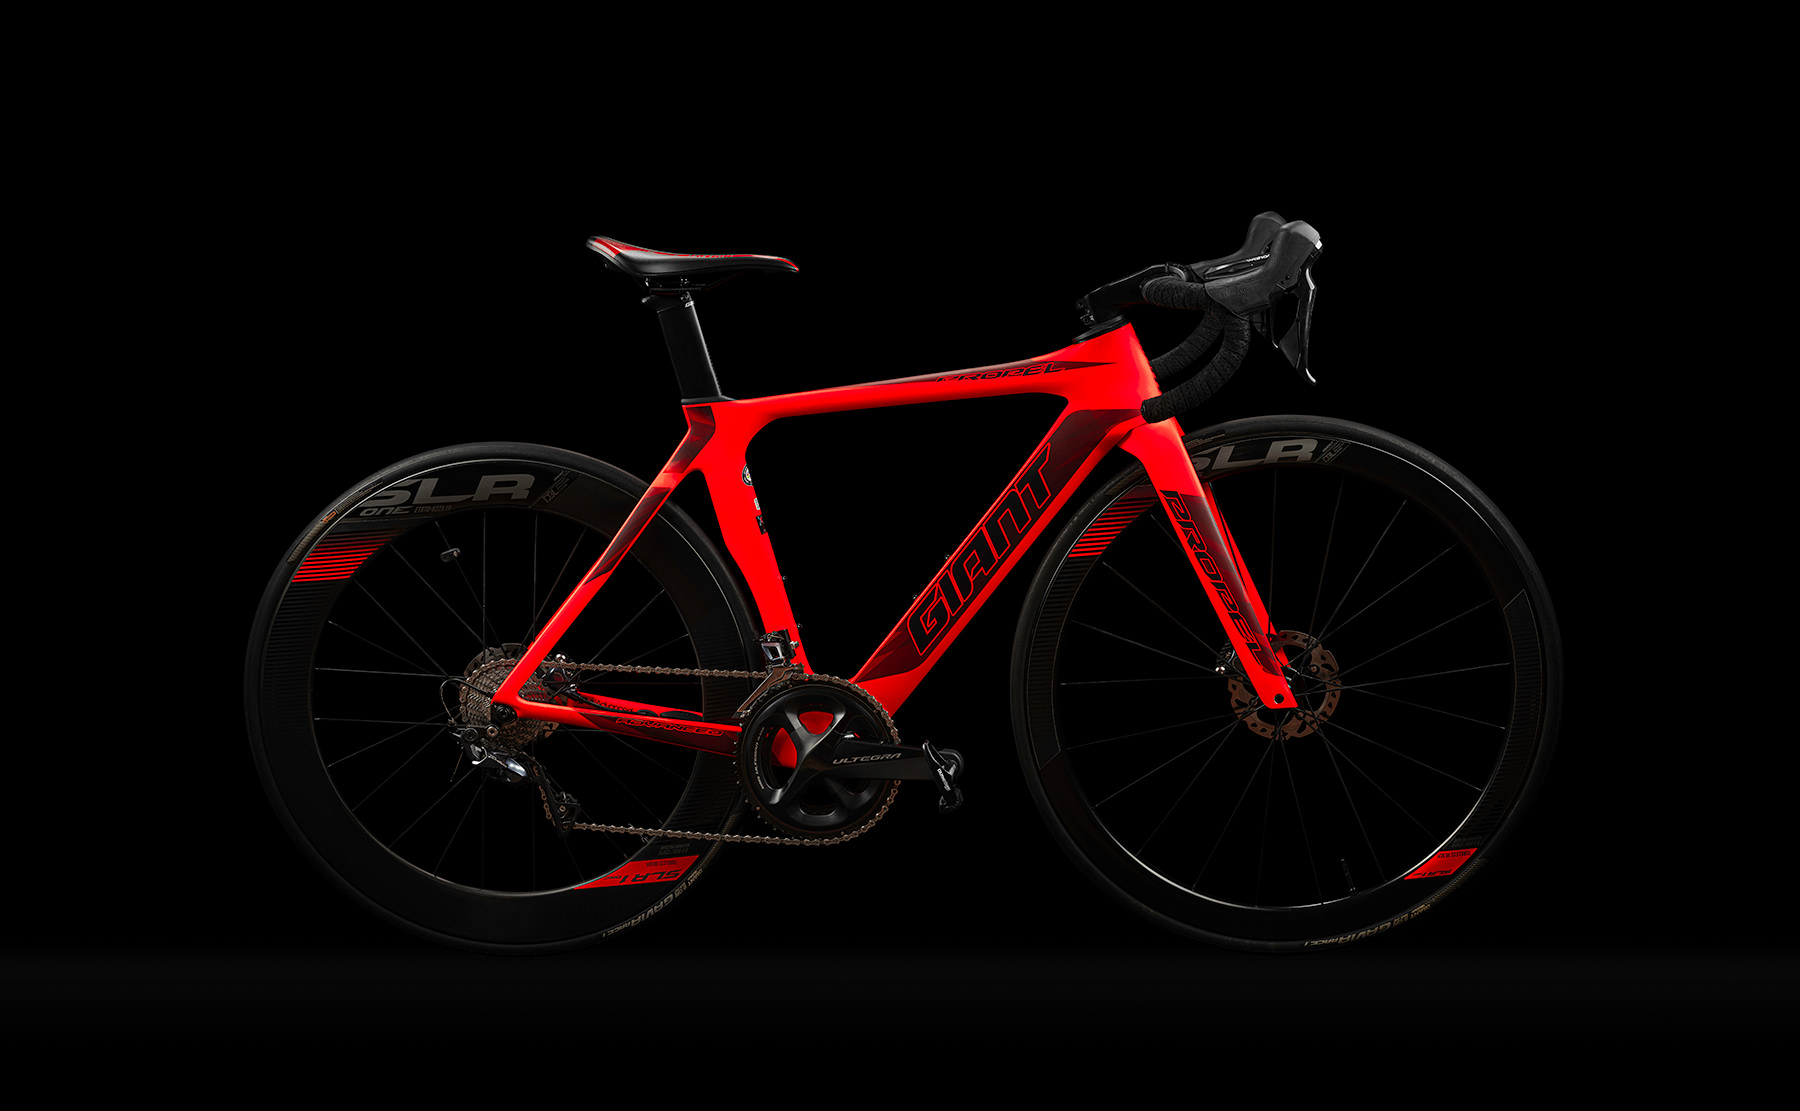 A side view of the Giant road bike on a black background